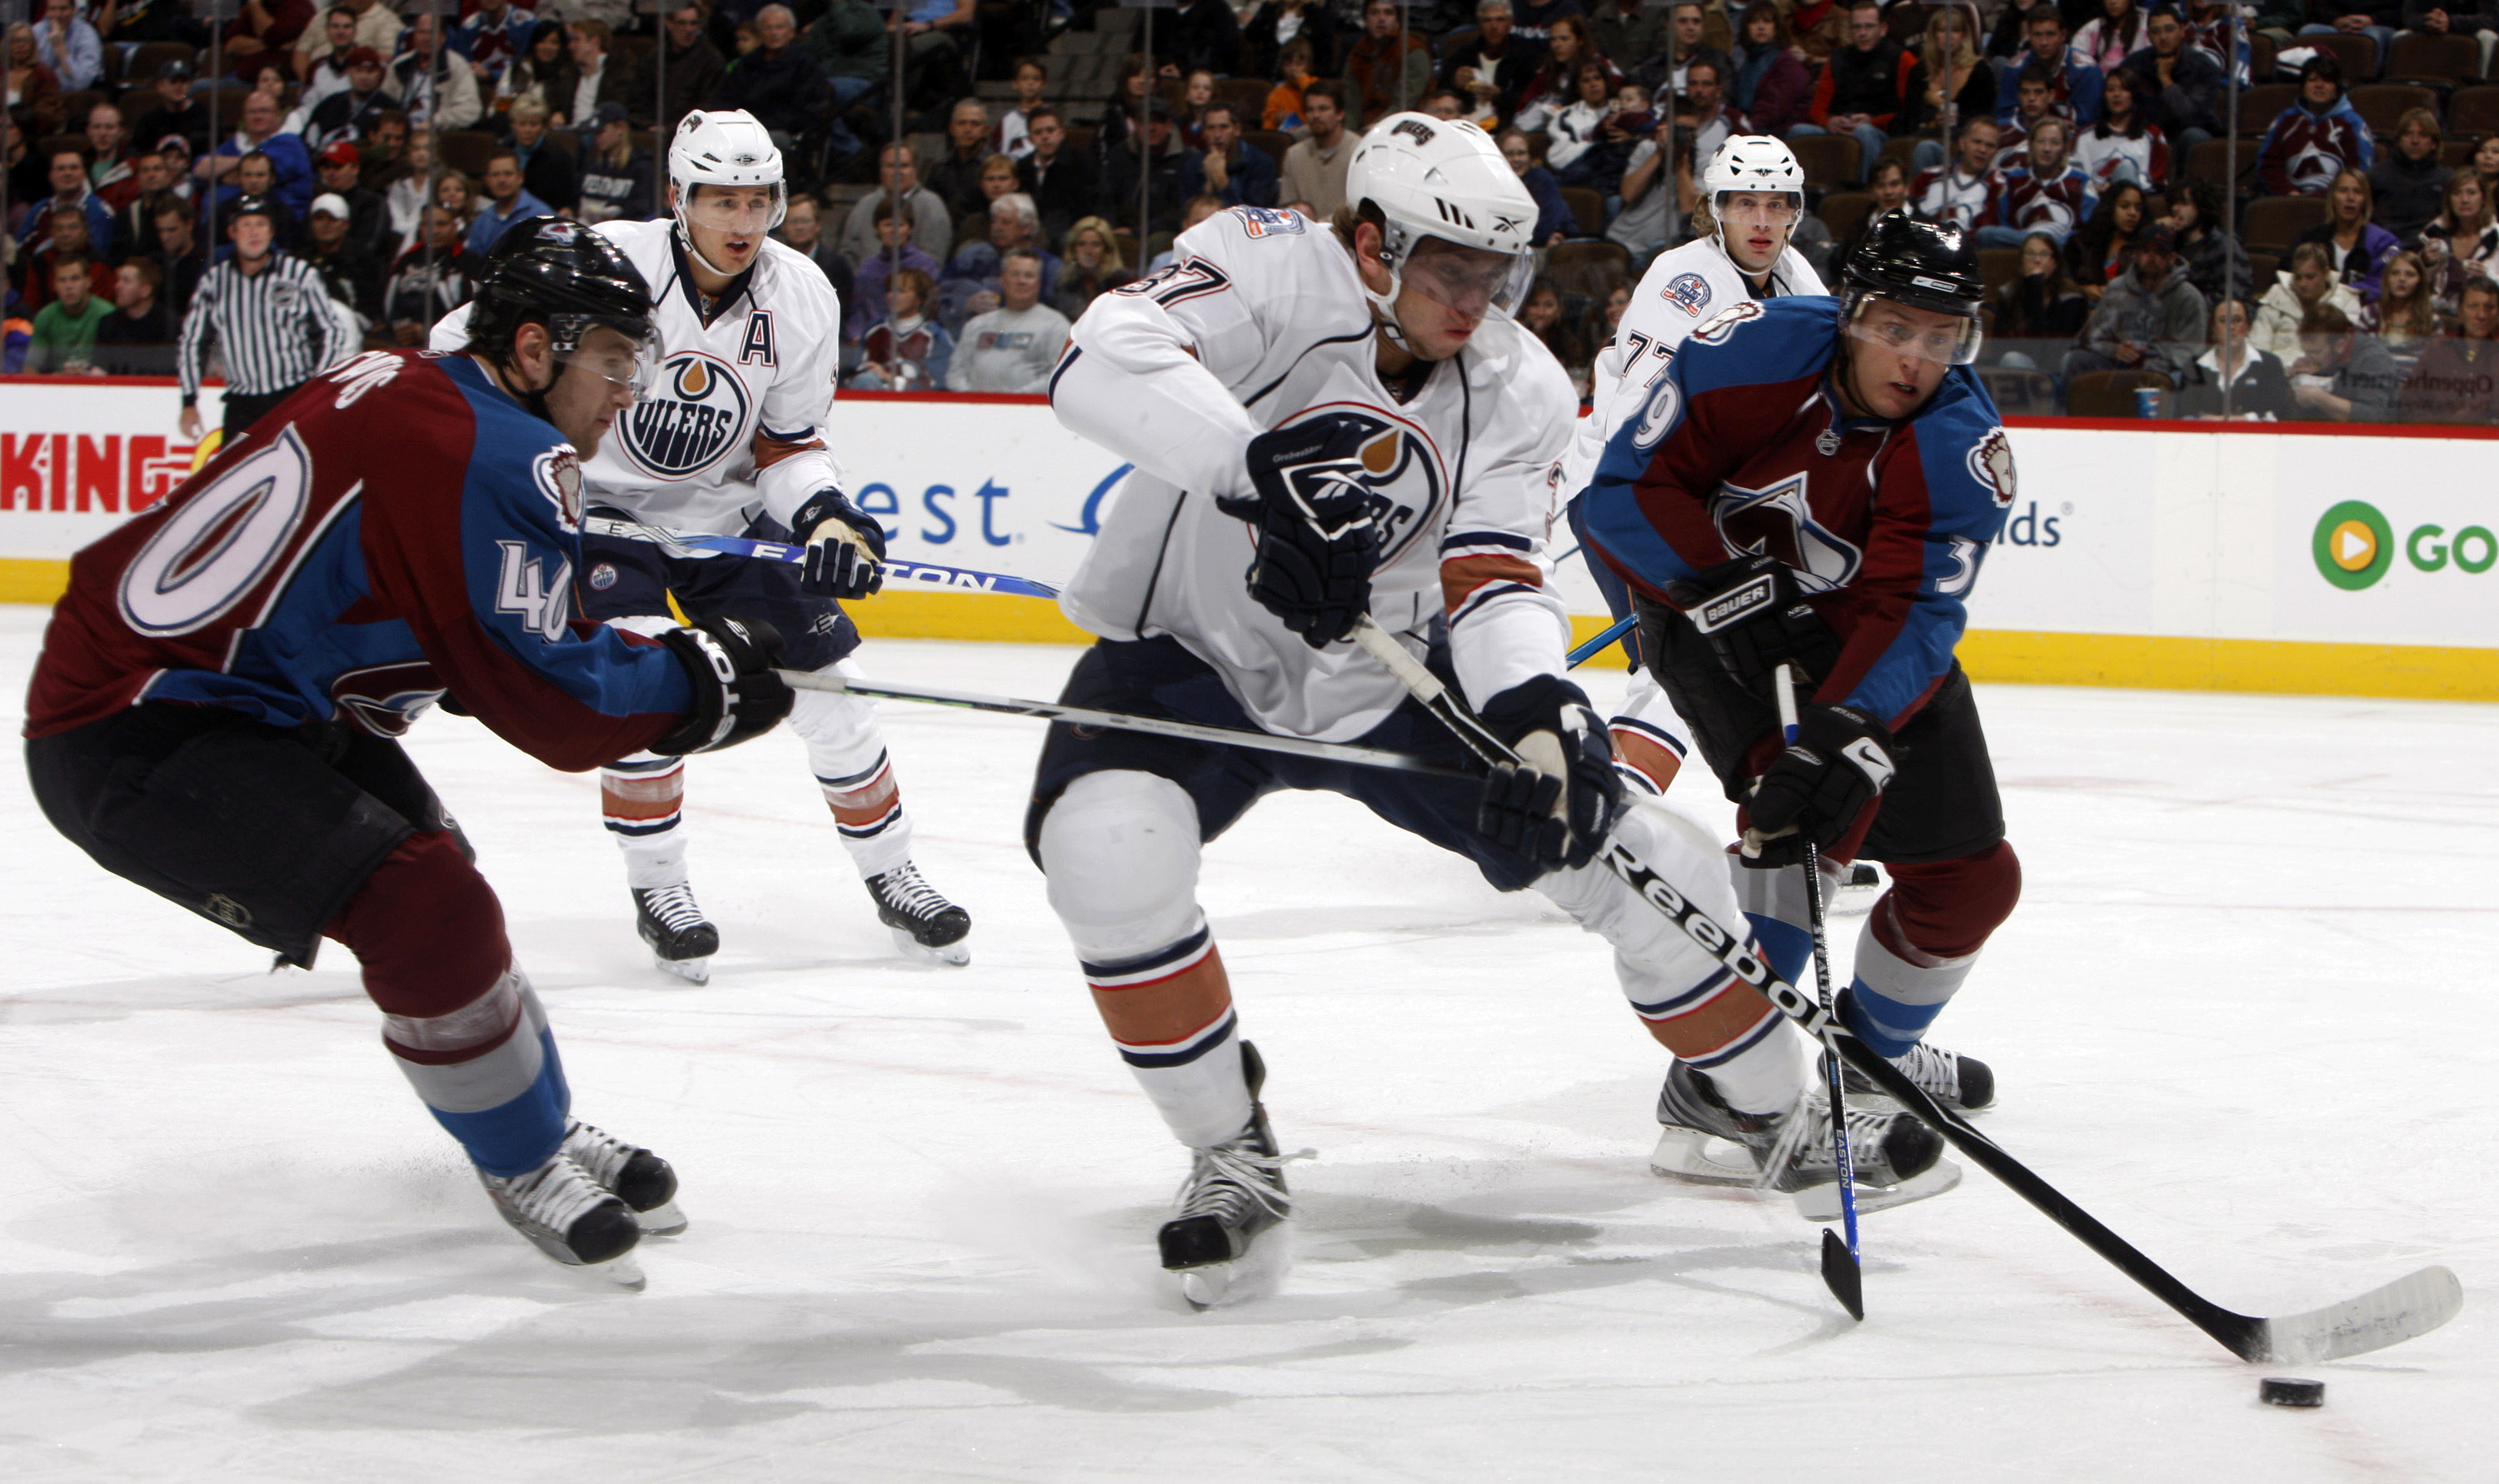 Colorado Avalanche at Edmonton Oilers Free Live Stream (6/6/22) How to Watch NHL Playoffs, Western Conference Finals, Game 4, time, TV channel, odds